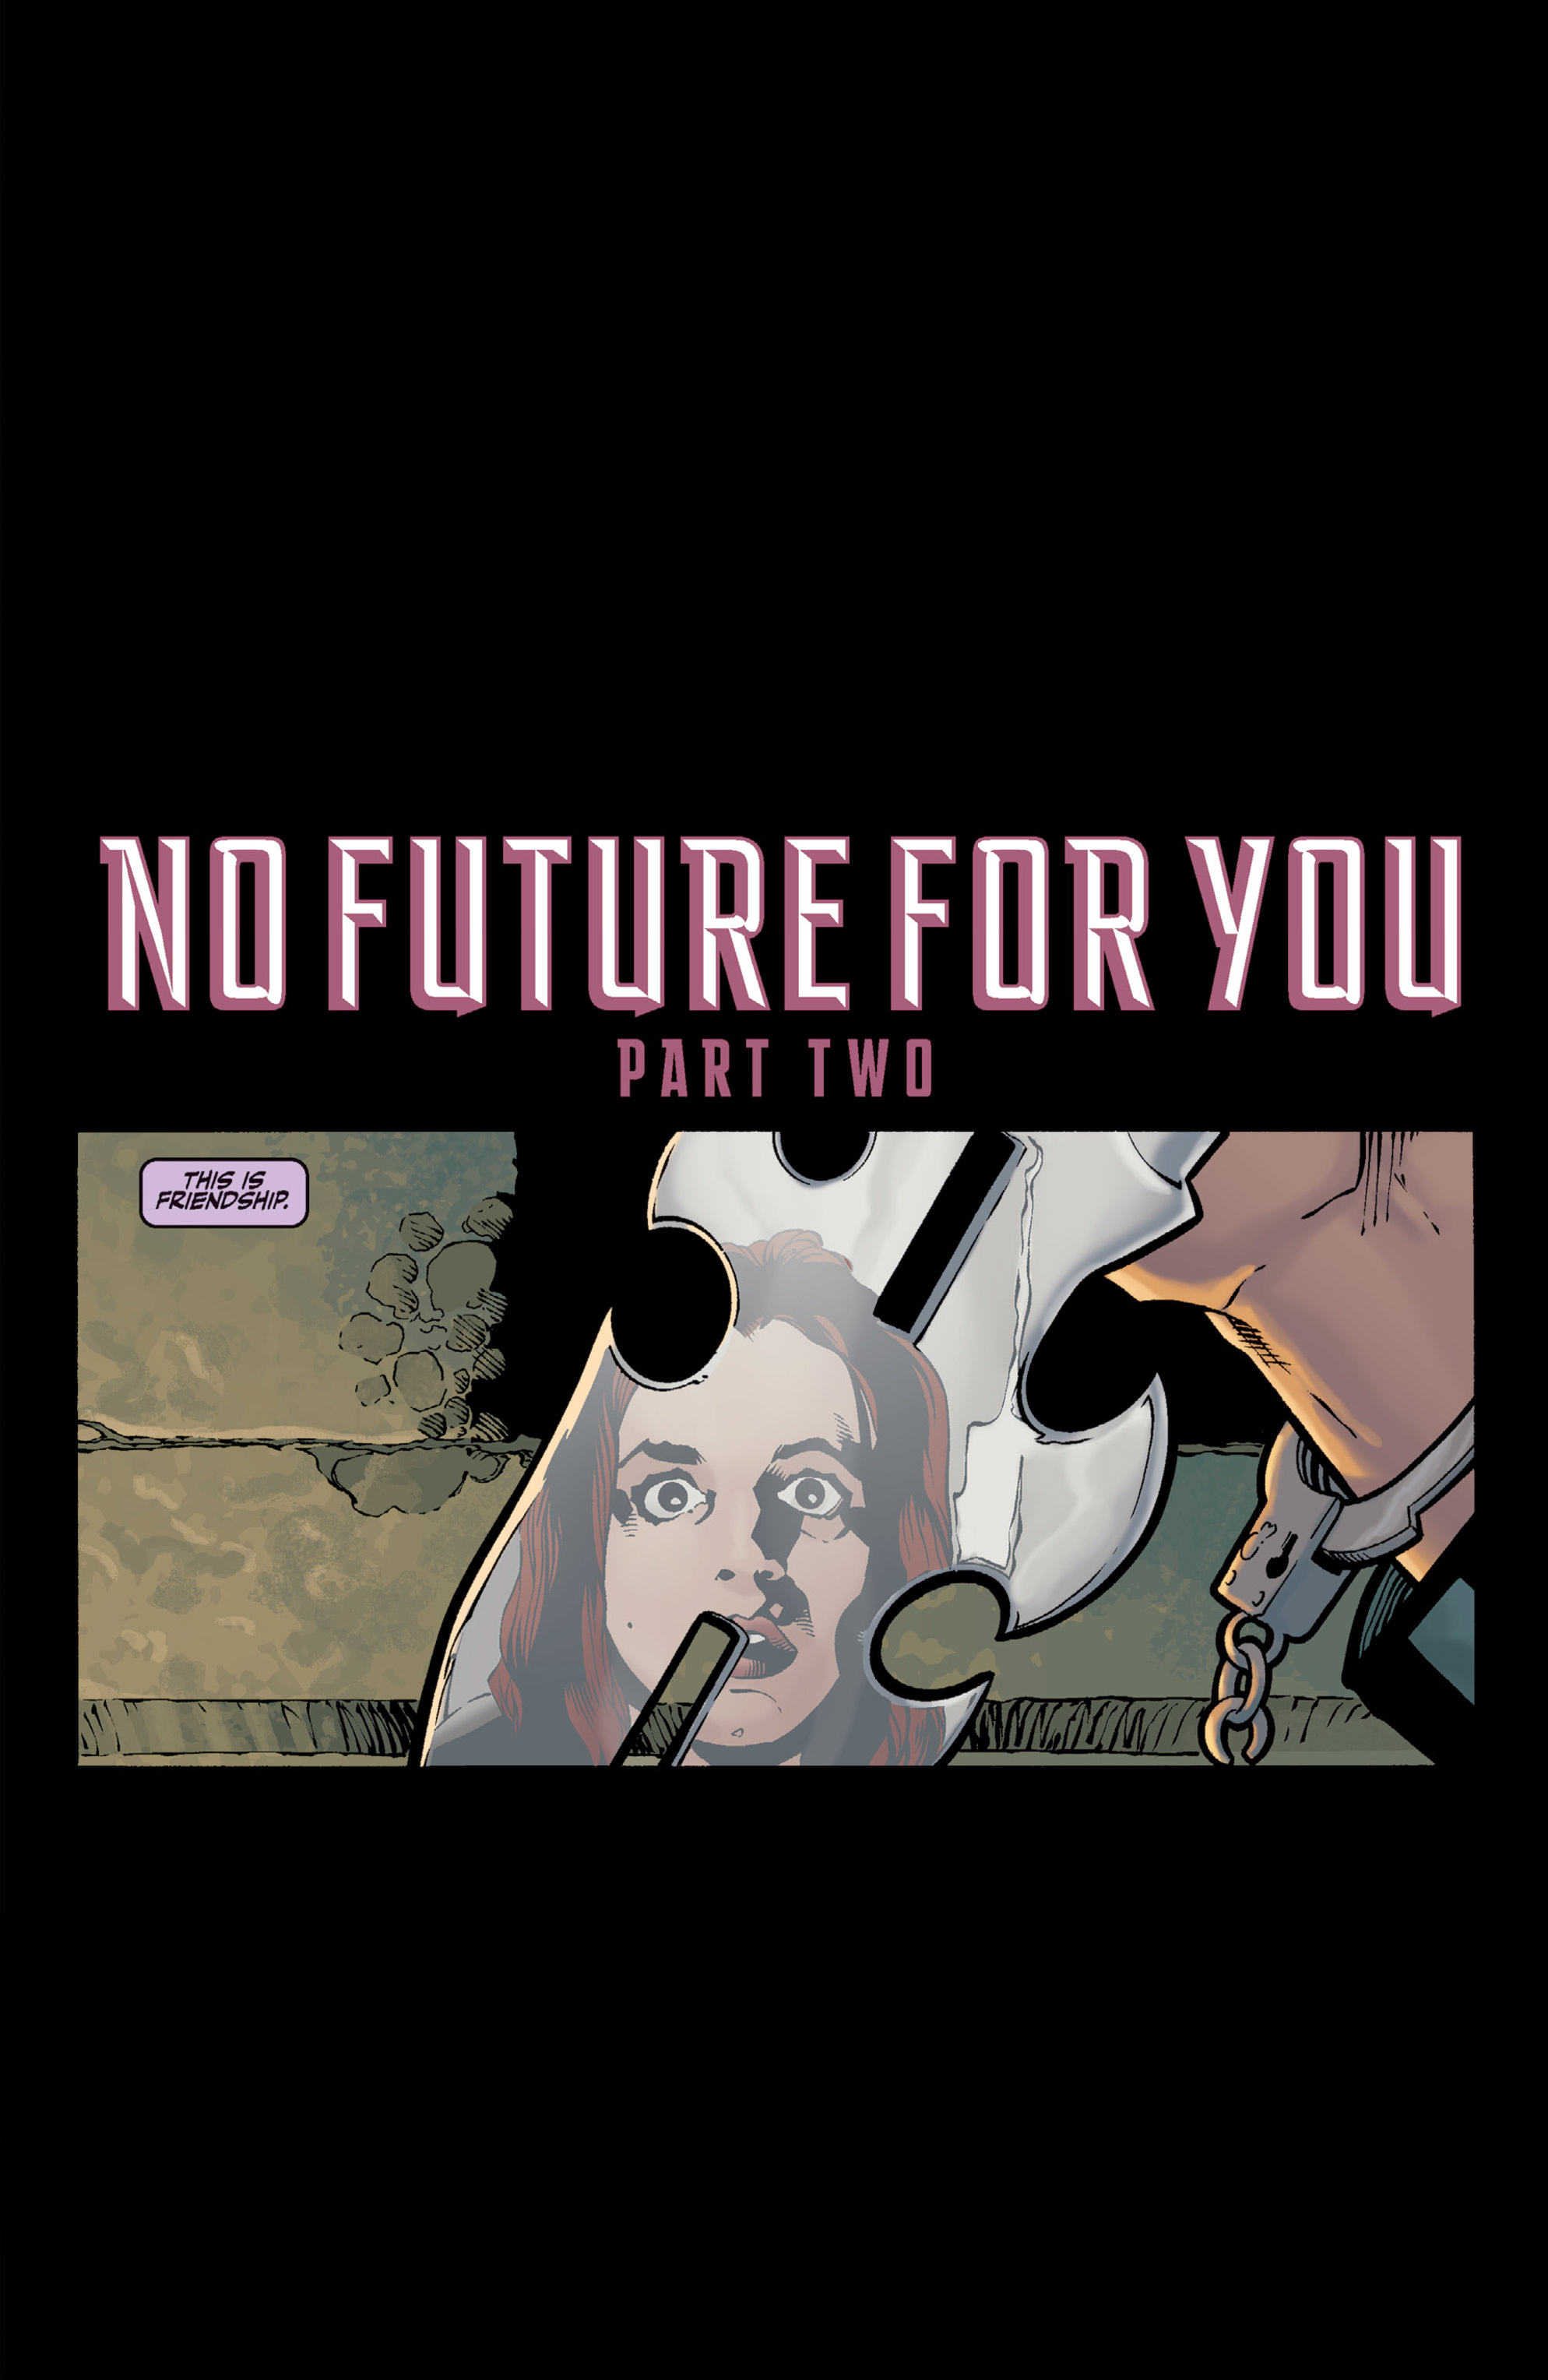 Read online Buffy the Vampire Slayer Season Eight comic -  Issue # _TPB 2 - No Future For You - 32